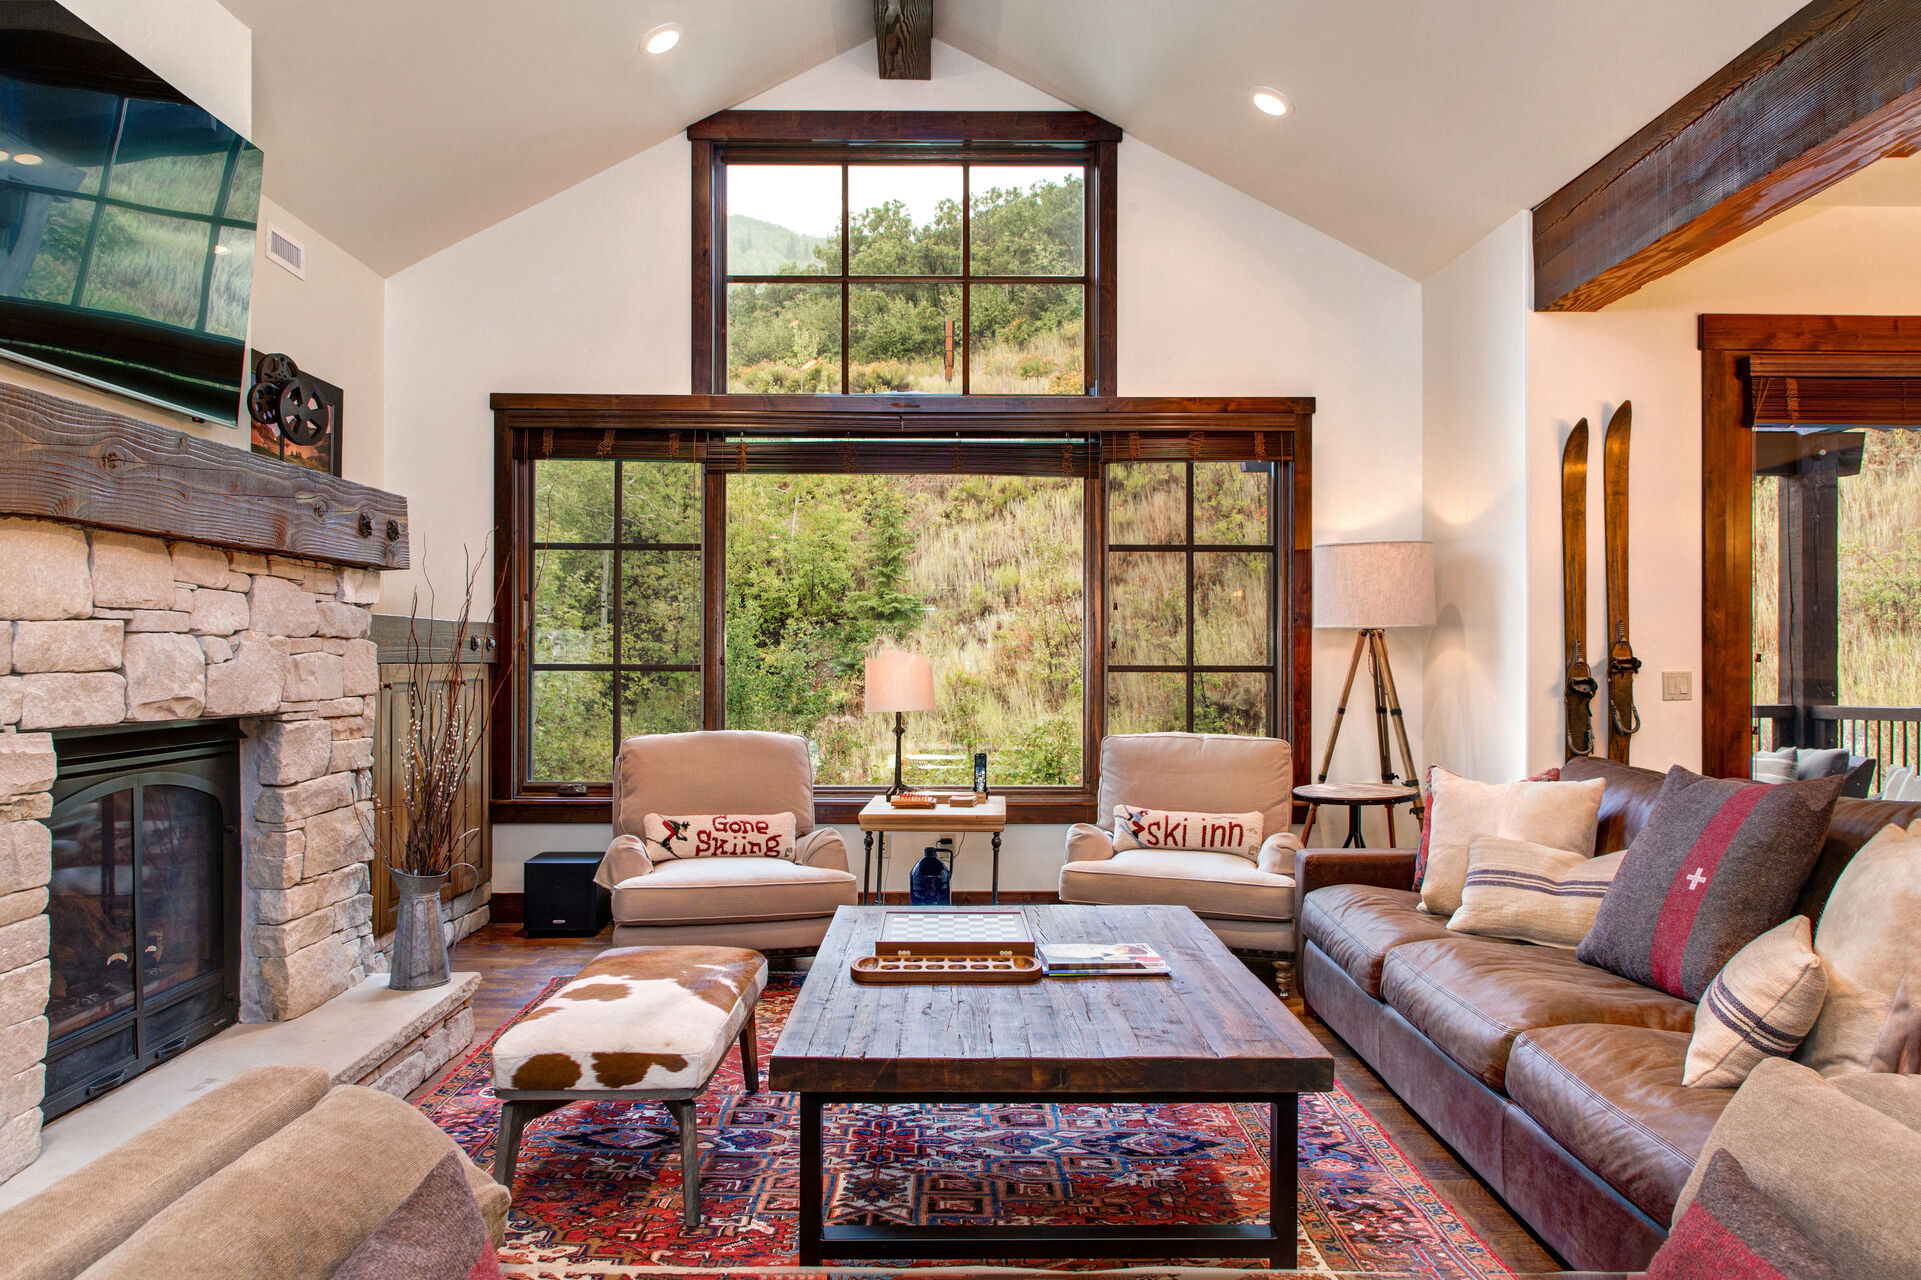 Vaulted Ceiling and Large Windows Allow for an Open and Airy Feel